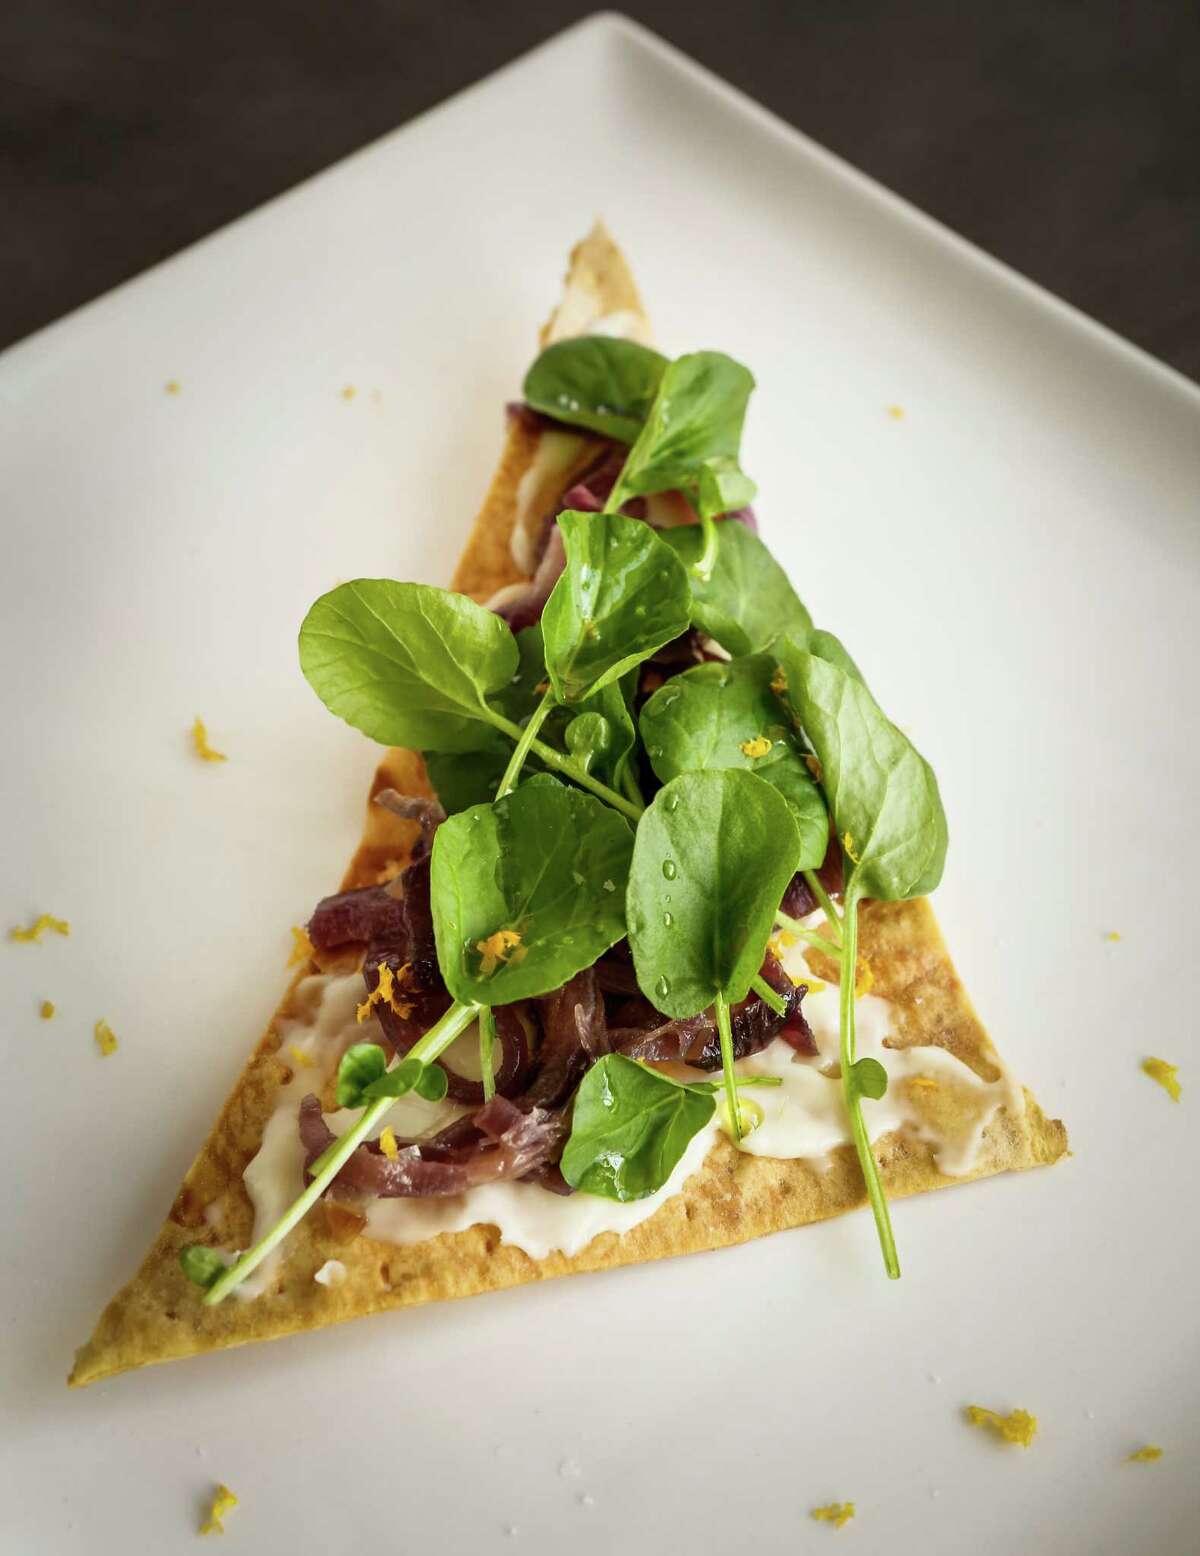 Crispy Flatbread With Watercress, Crescenza Cheese & Caramelized Red Onions.